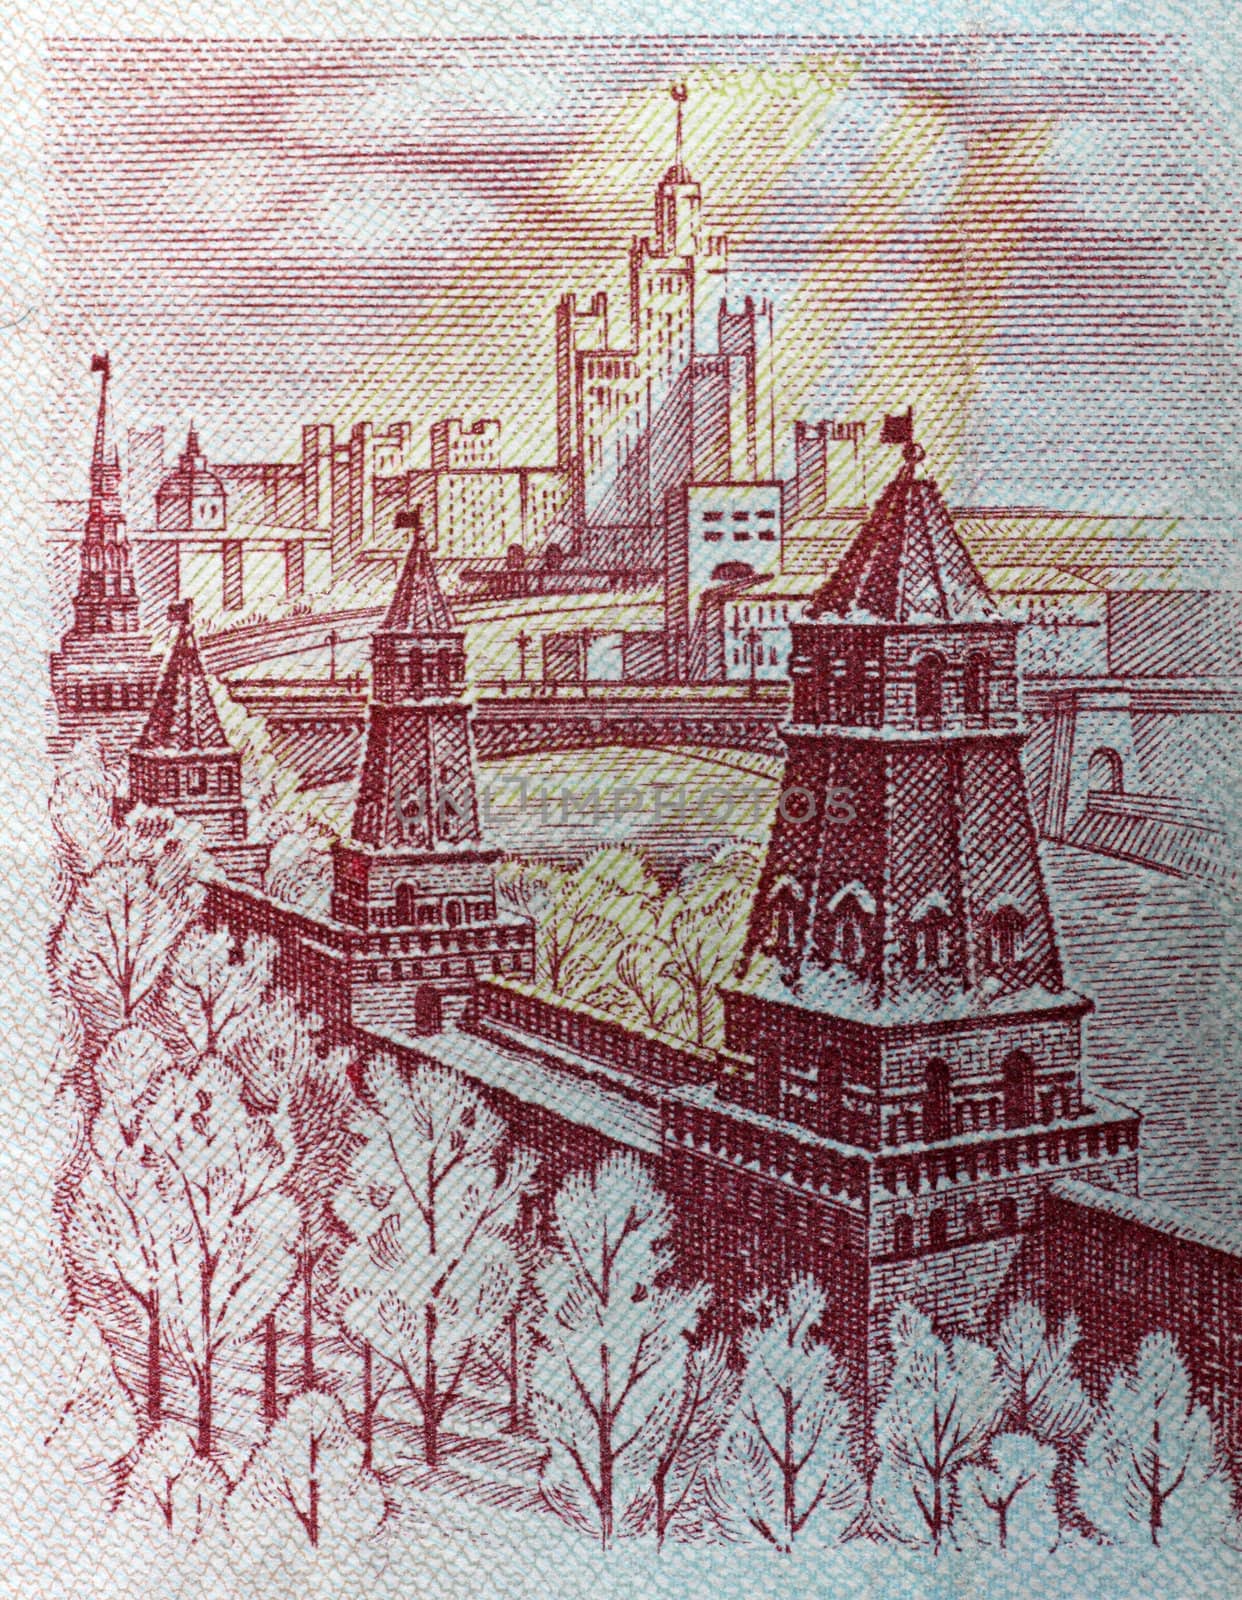 close up of the Kremlin on five thousand roubles banknote